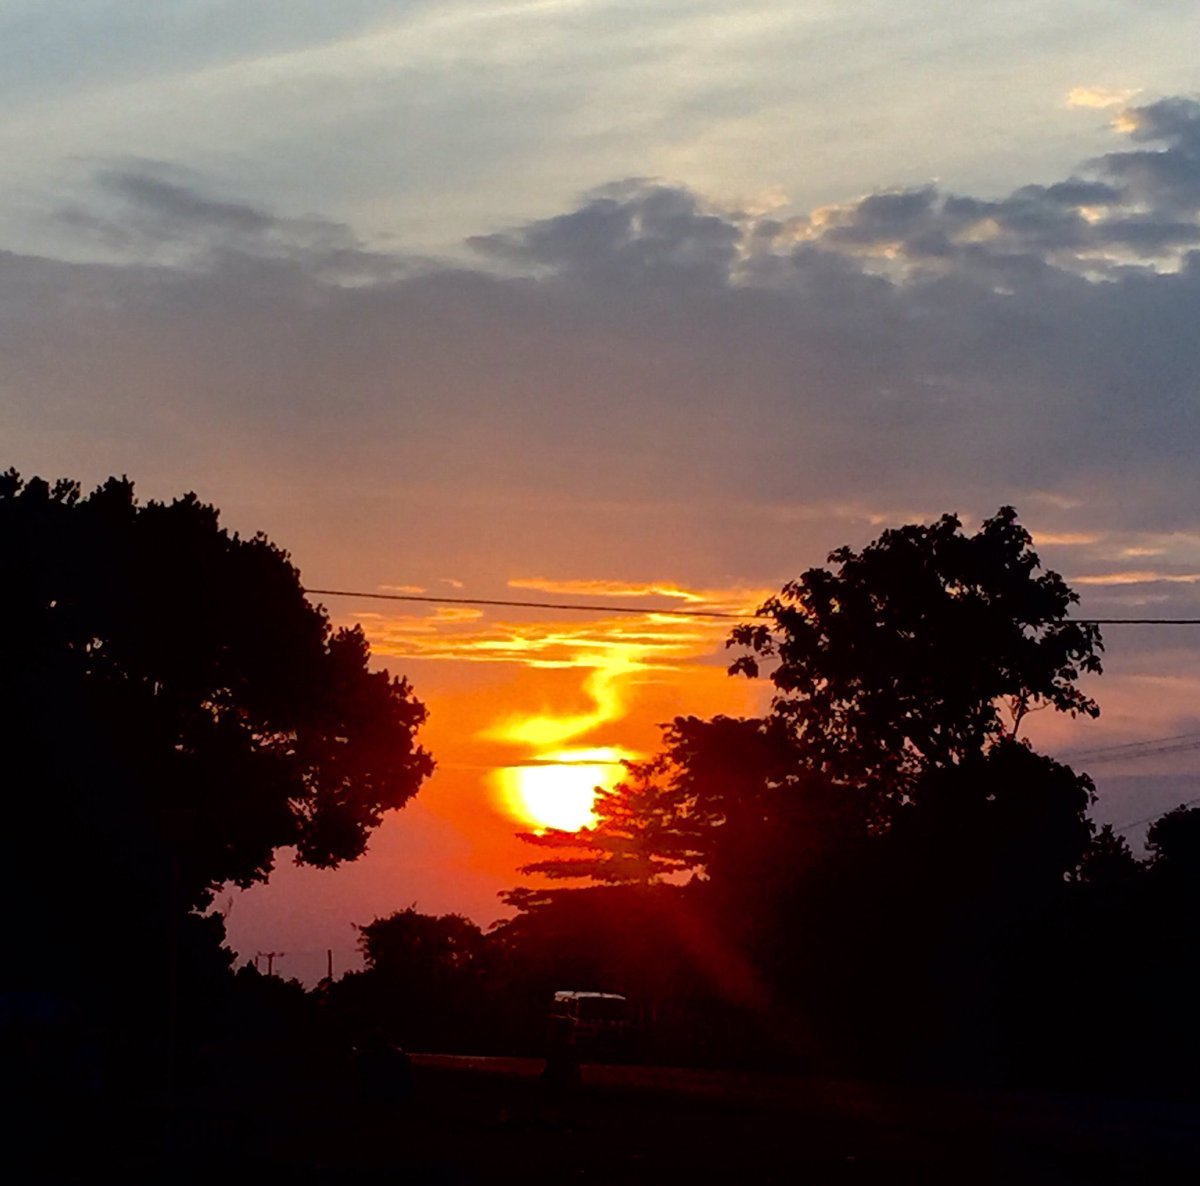 Jacob Oulanyah on Twitter: "Uganda- gifted by nature! An amazing sunset, like a cup of coffee! Going to Murchison Falls… "